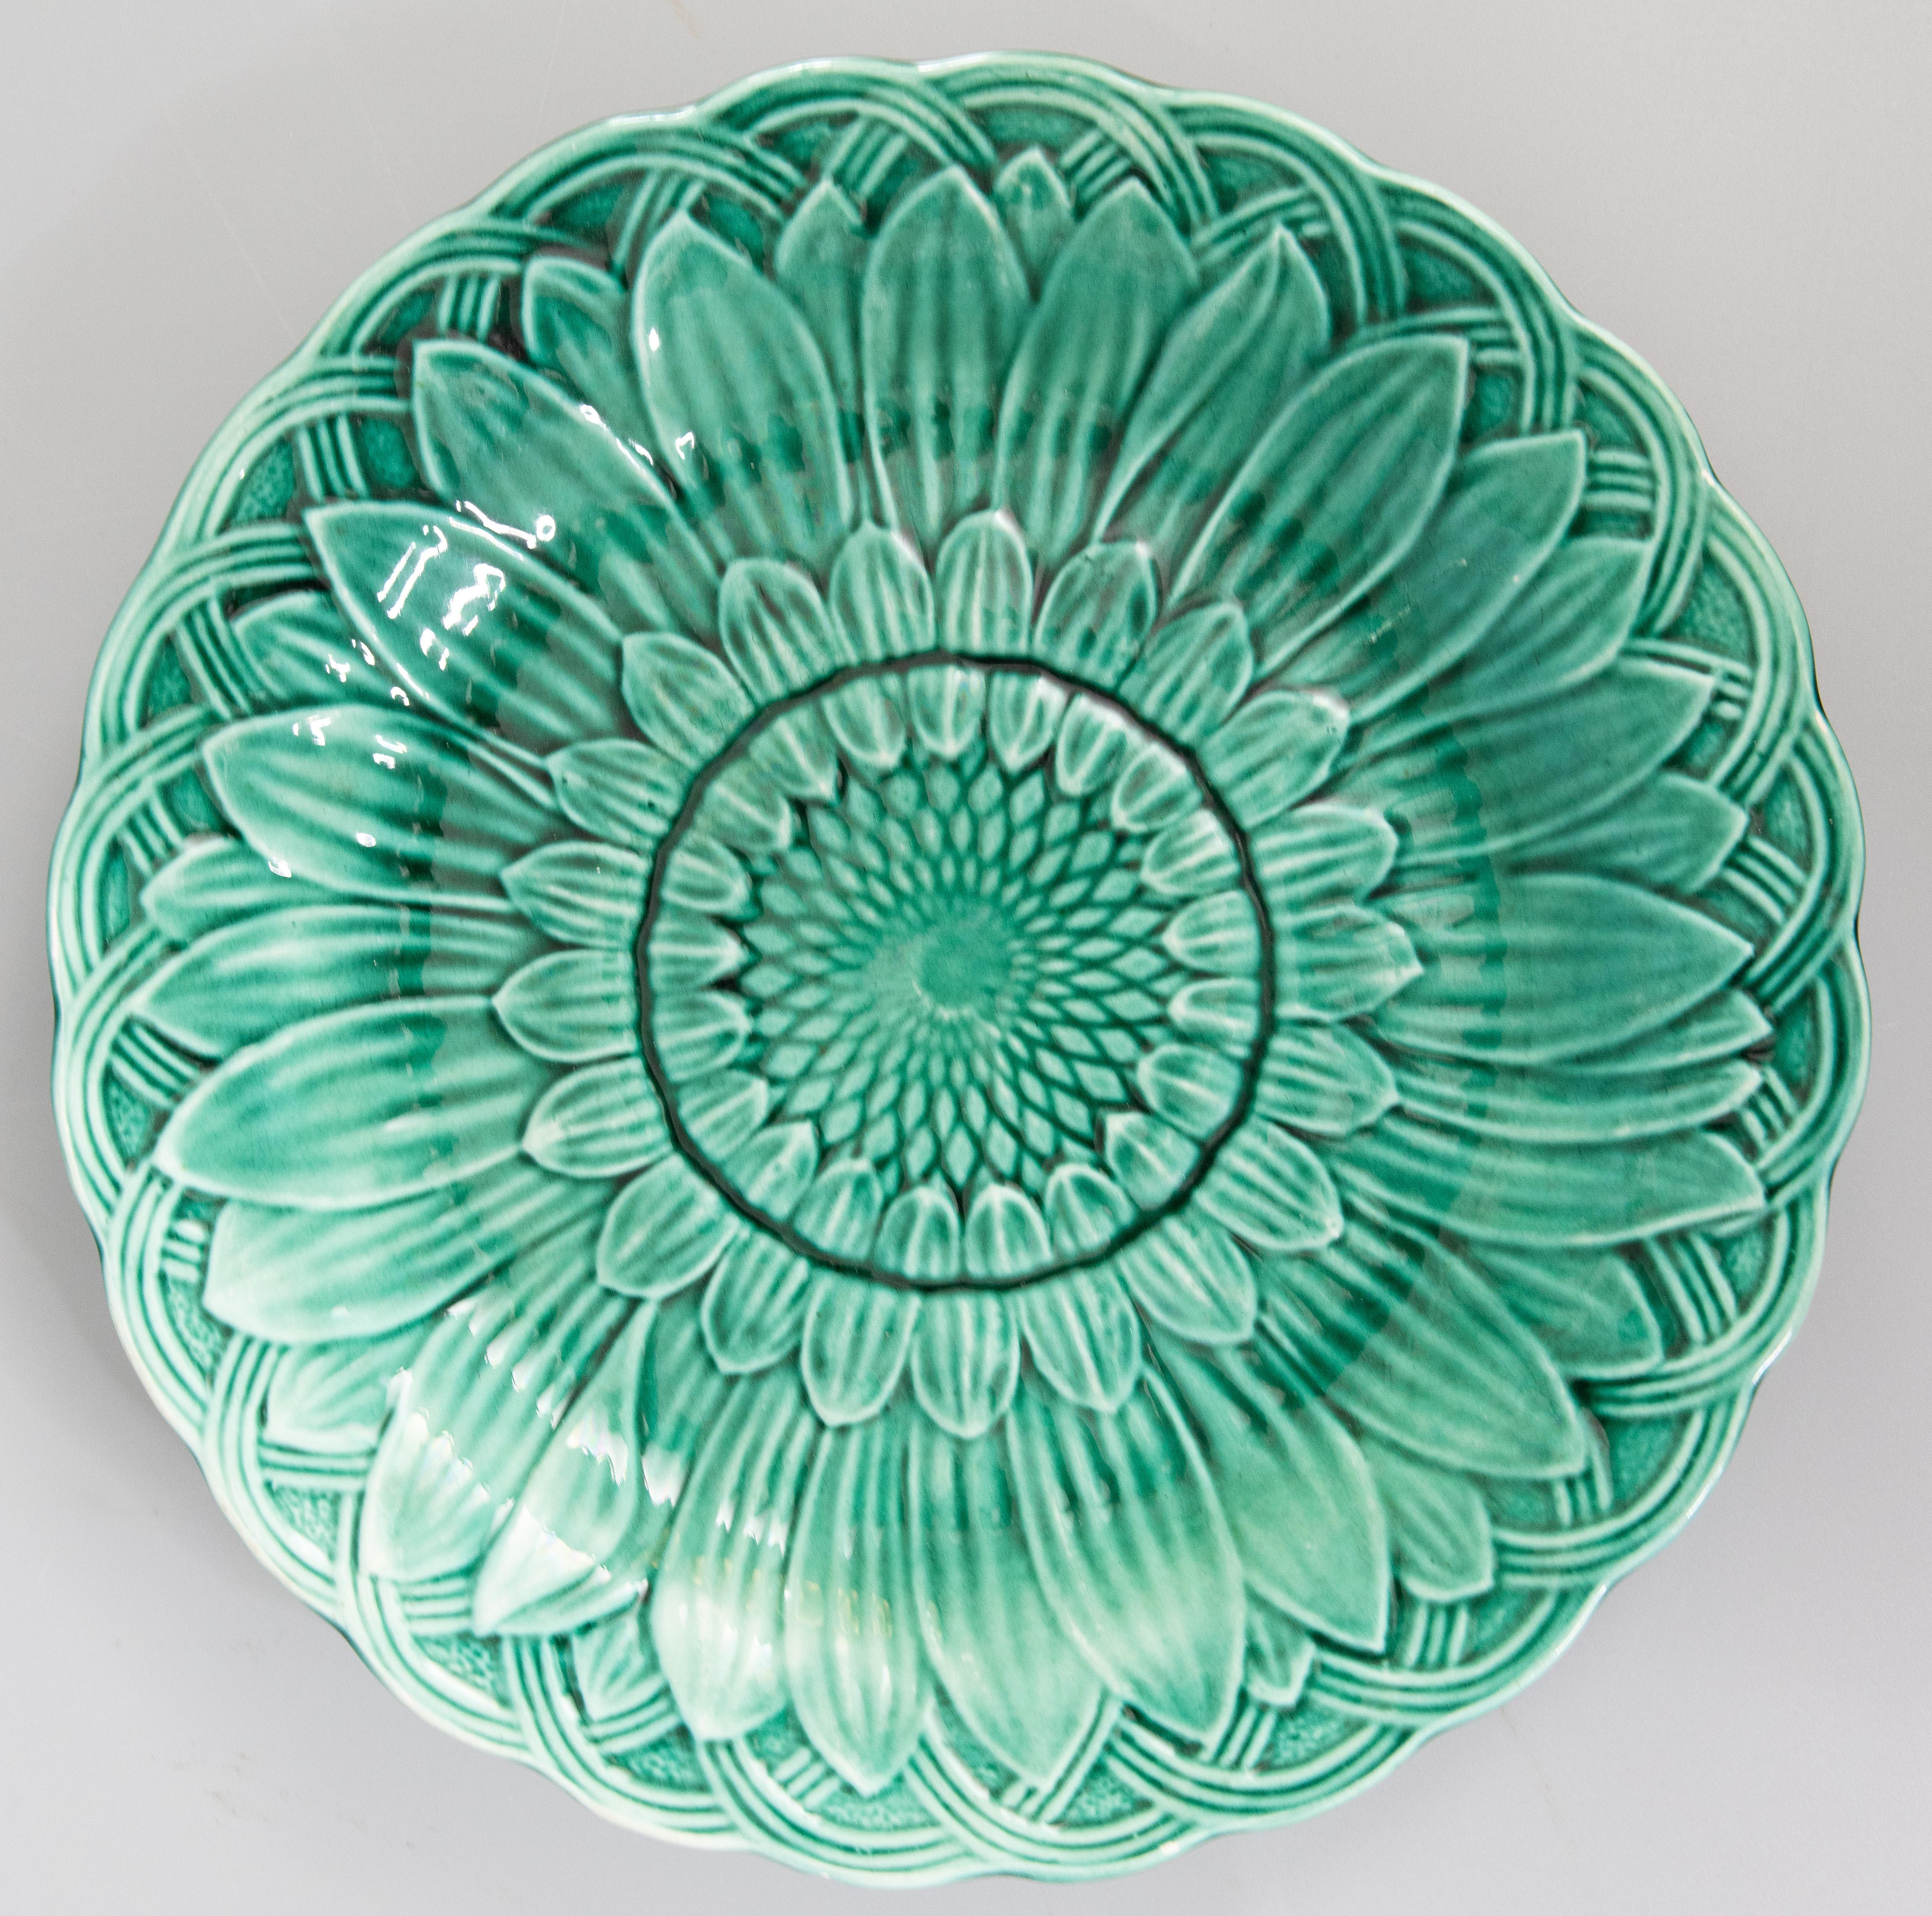 A lovely pair of antique English green glazed majolica leaf plates with a beautiful sunflower and basket weave design, circa 1870. These display beautifully and would be wonderful hung on a wall or placed in a cabinet, added to a collection, or used